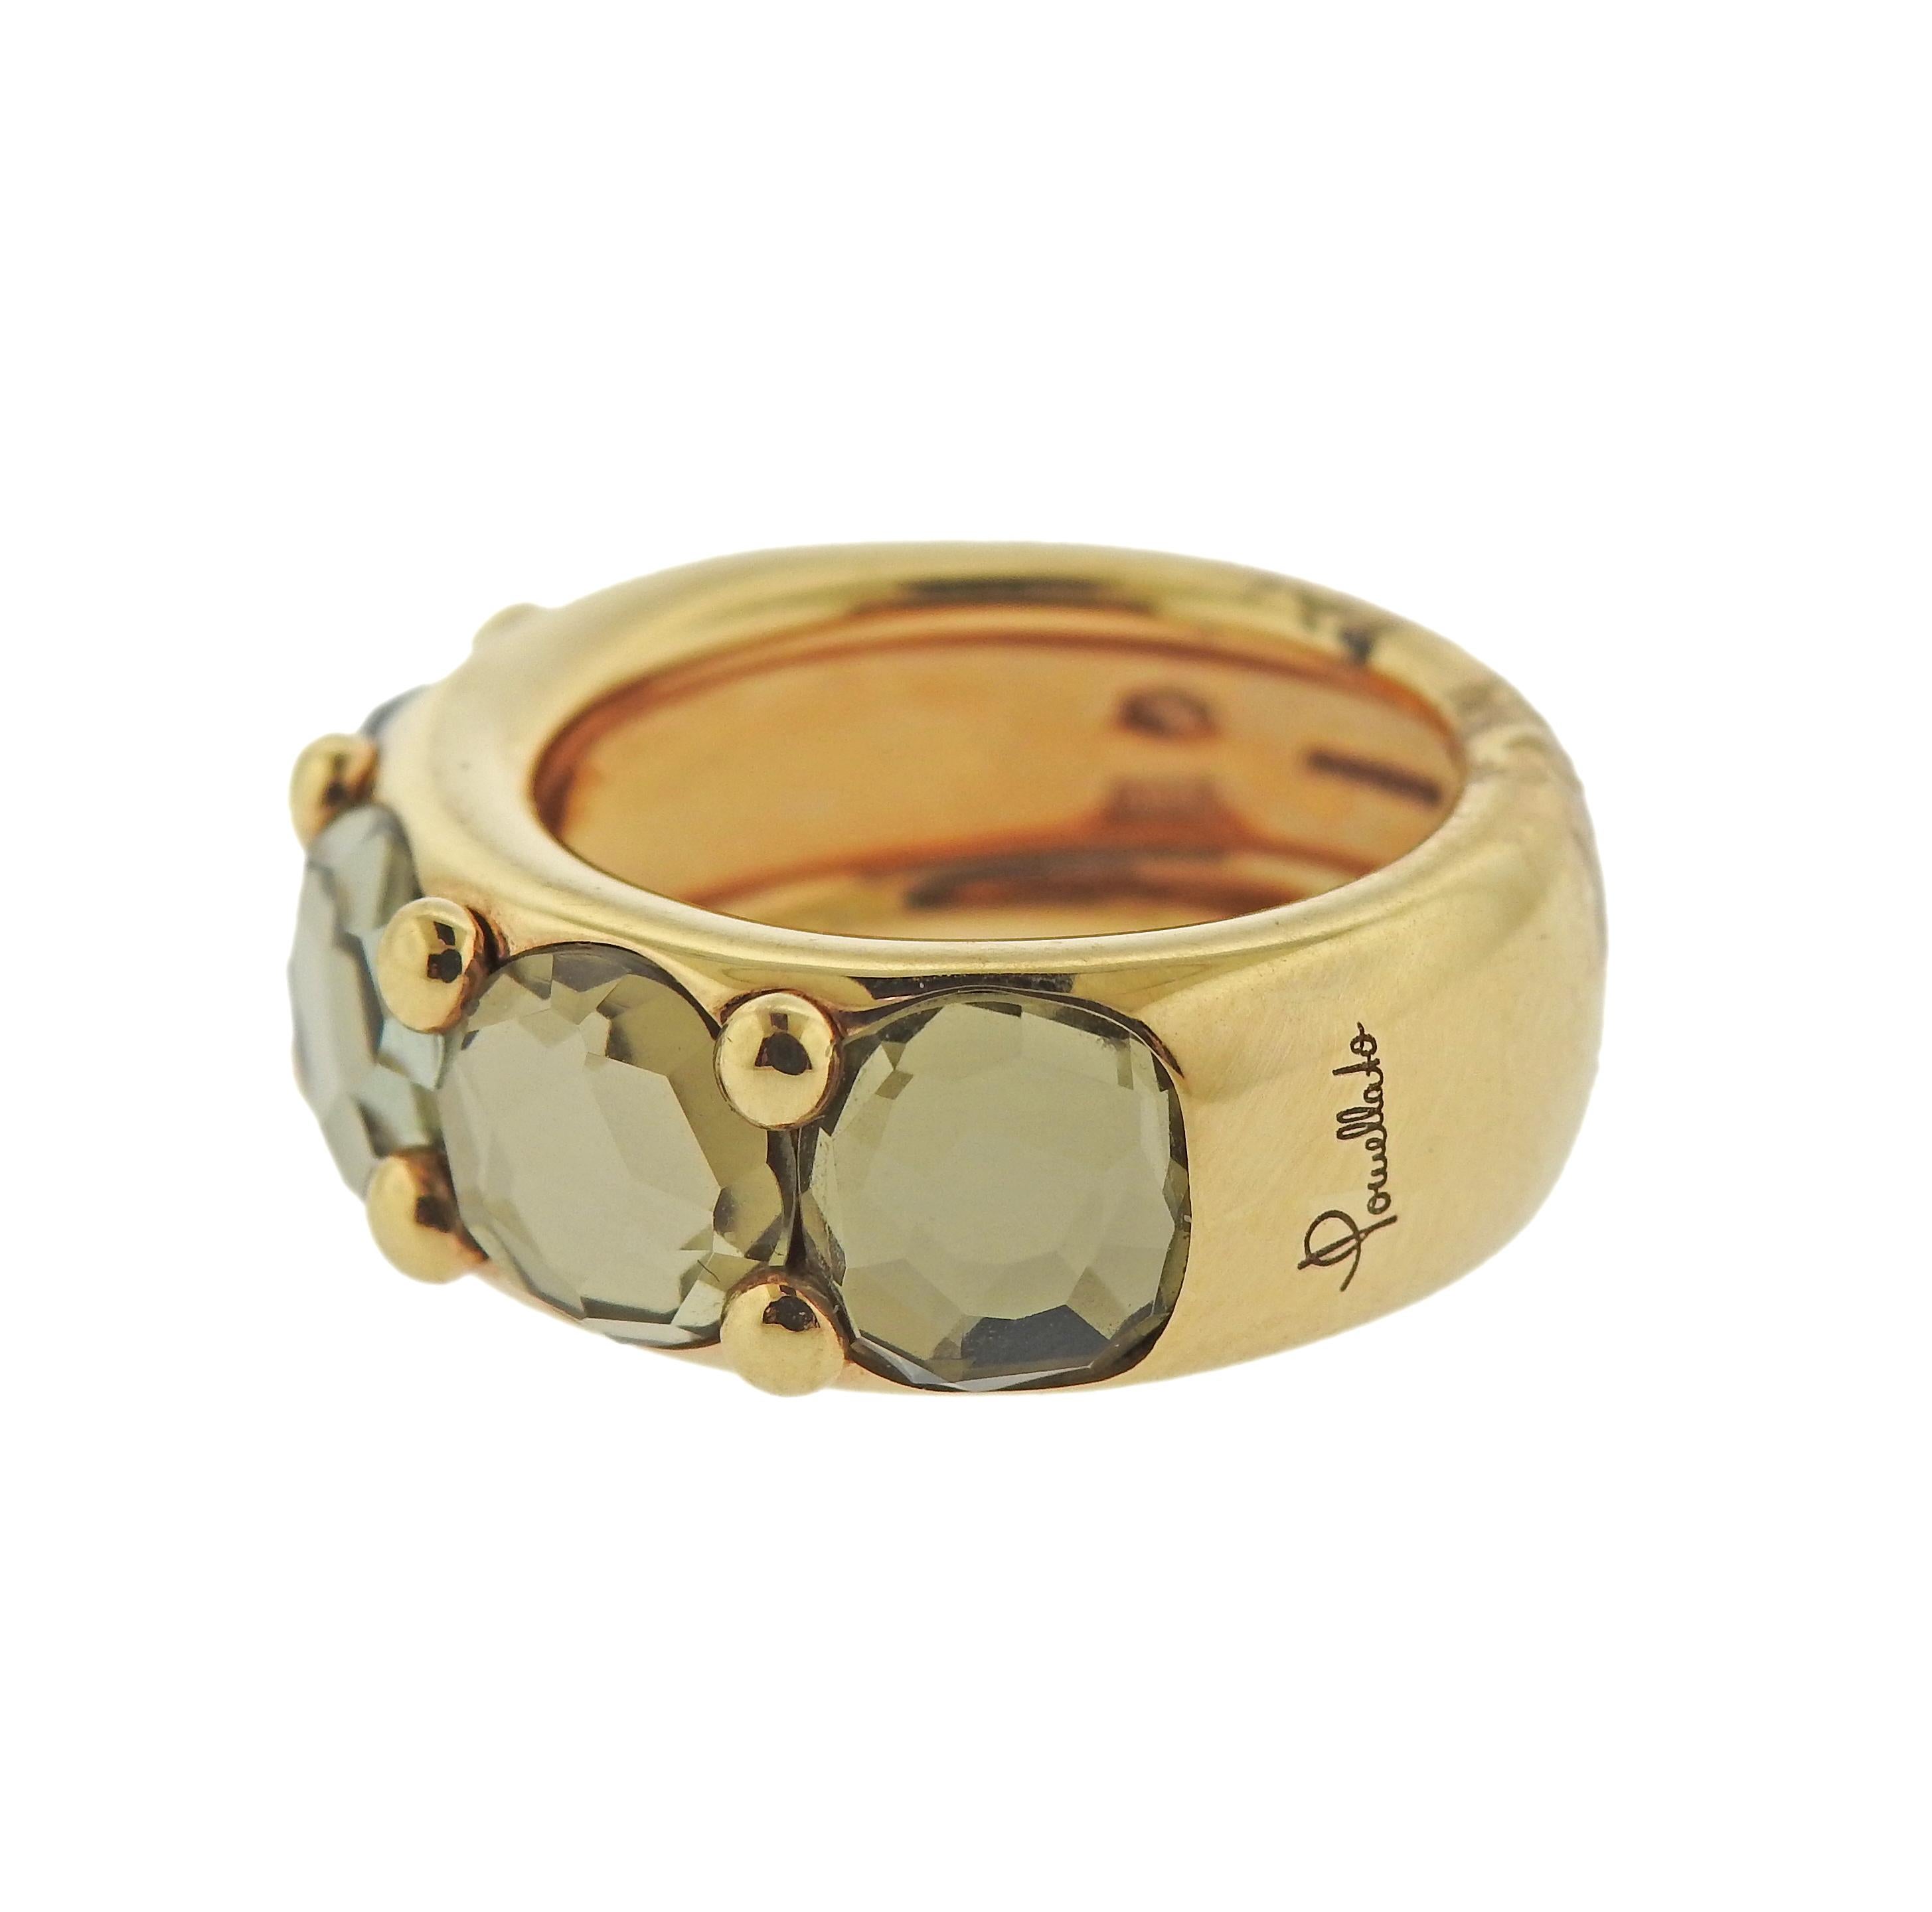 18k gold Narciso ring by Pomellato, with faceted prasiolites. Ring size - 6.75, ring is 8.5mm wide. Marked with serial number, Italian mark, 750 and Pomellato. Weight - 15.7 grams.